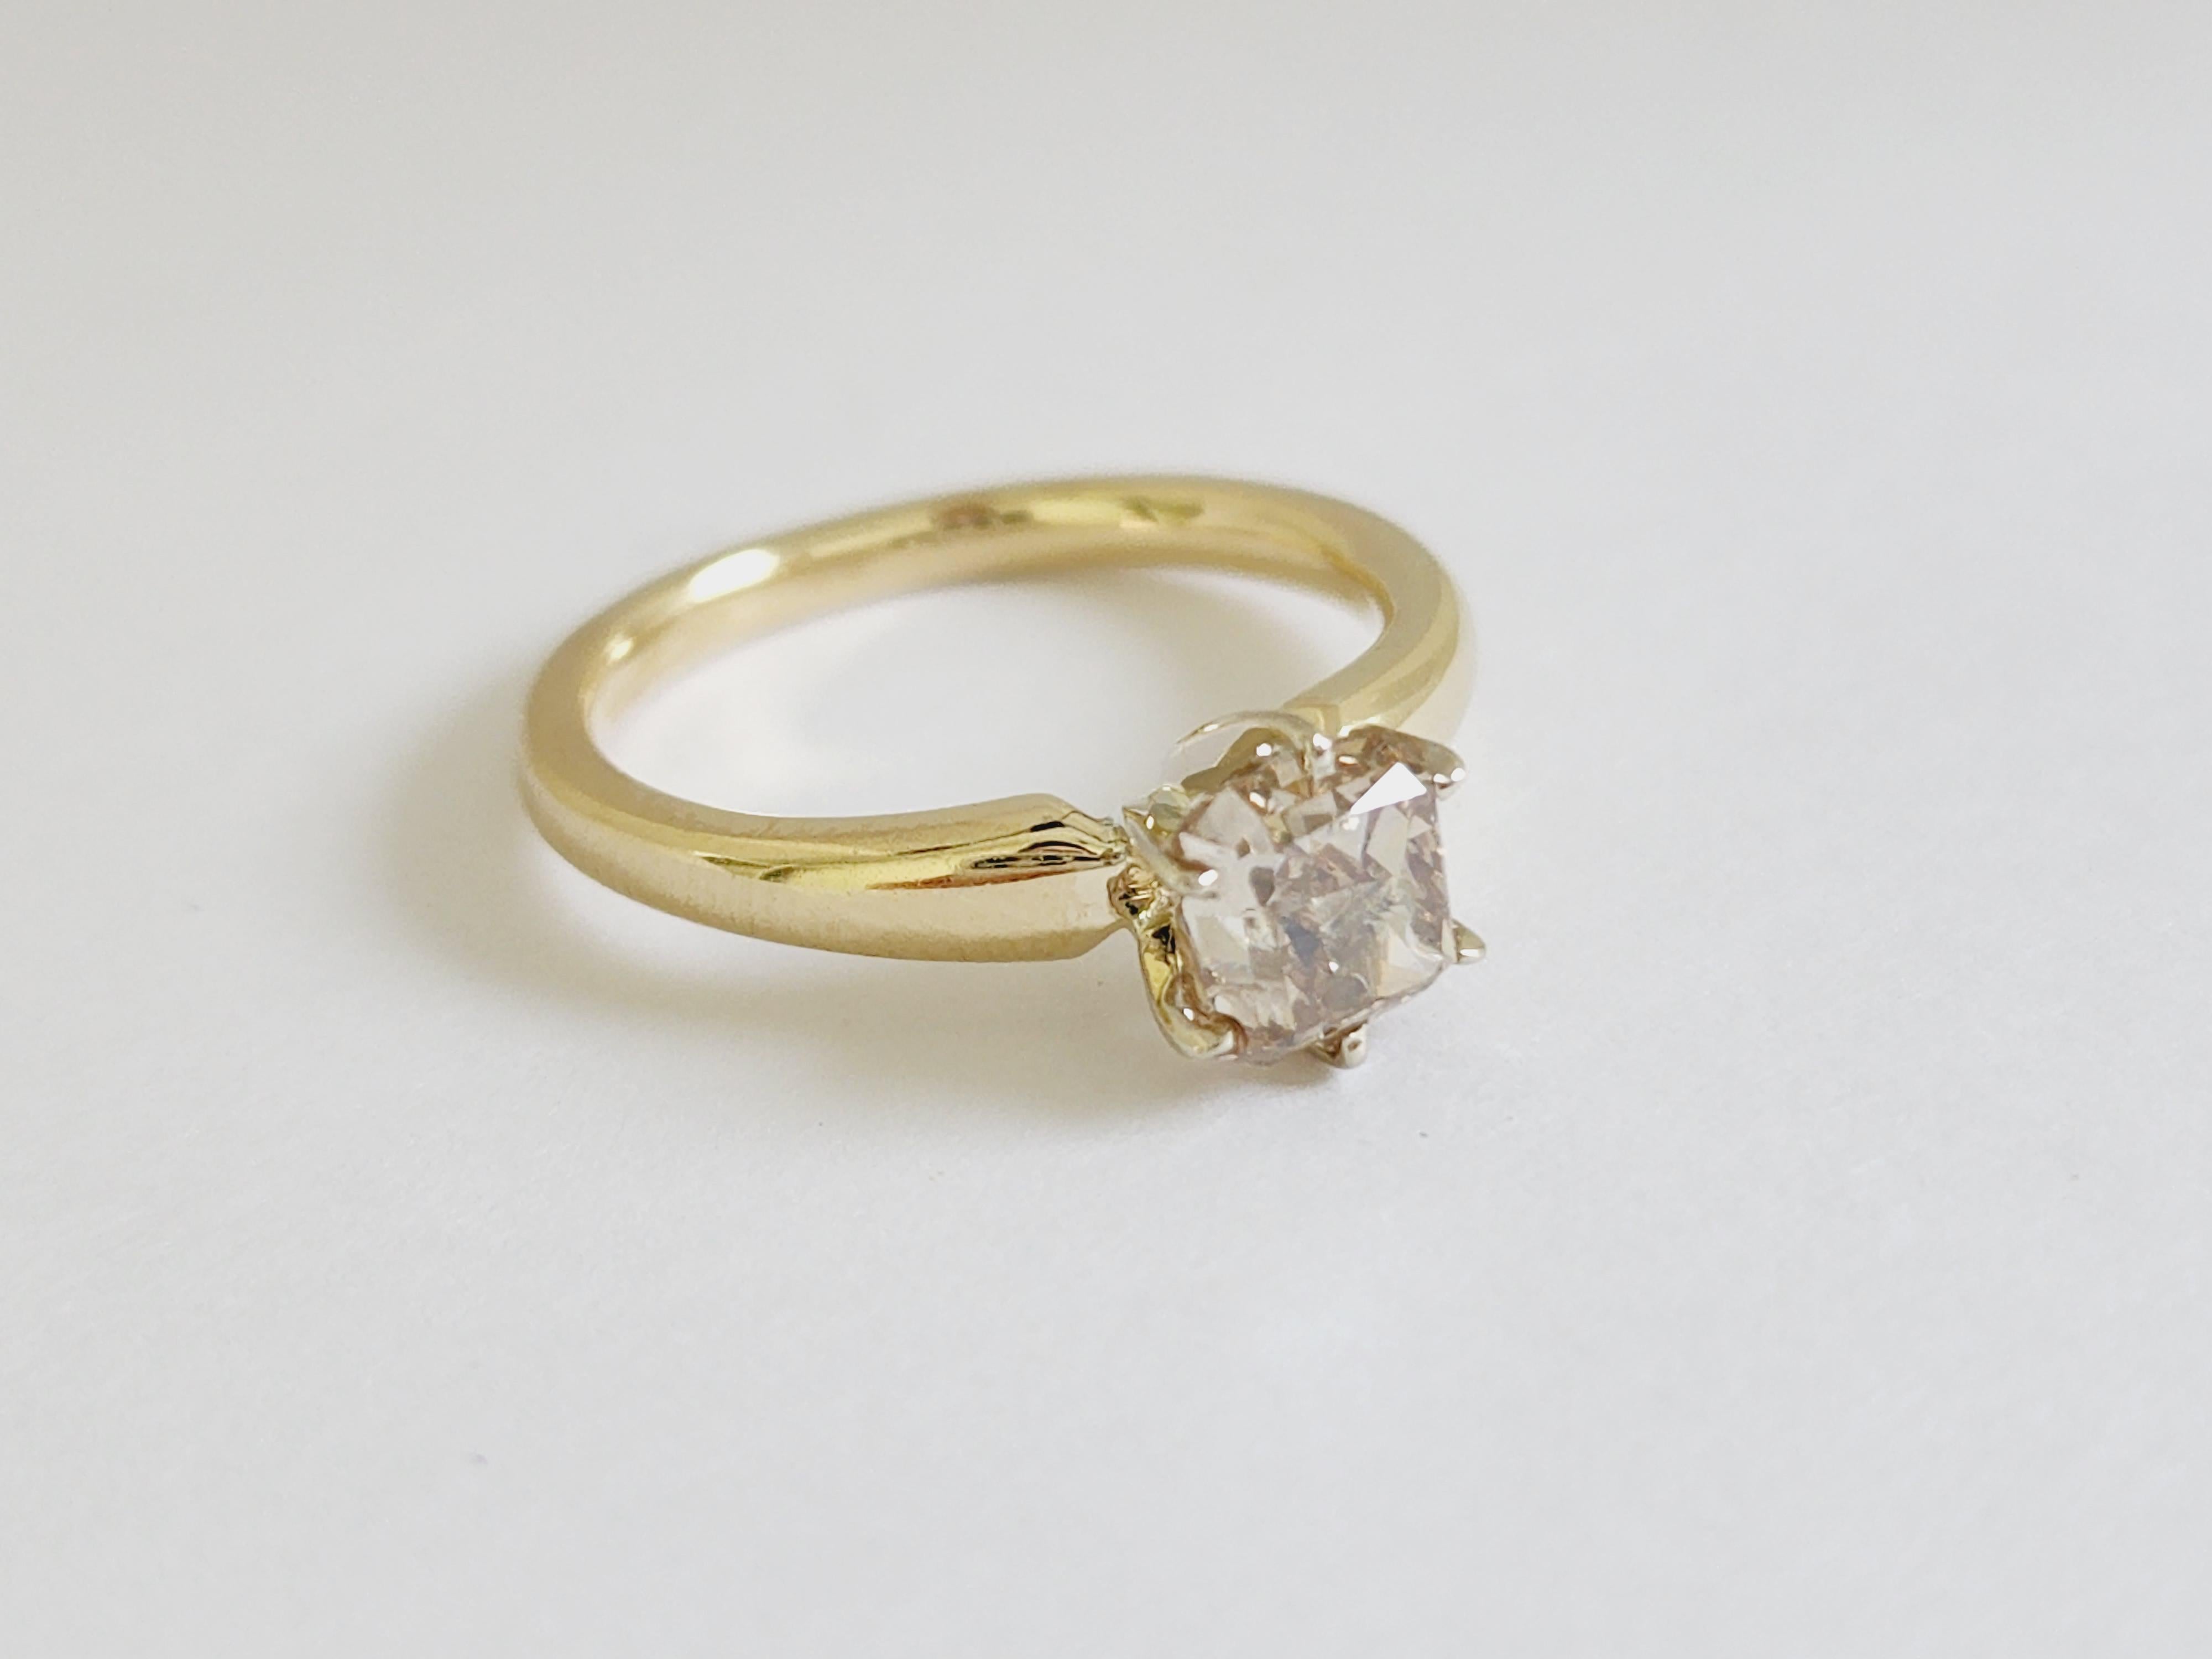 1.66 Carat Radiant Cut Fancy Color Diamond Yellow Gold Solitaire Ring 14 Karat In New Condition For Sale In Great Neck, NY